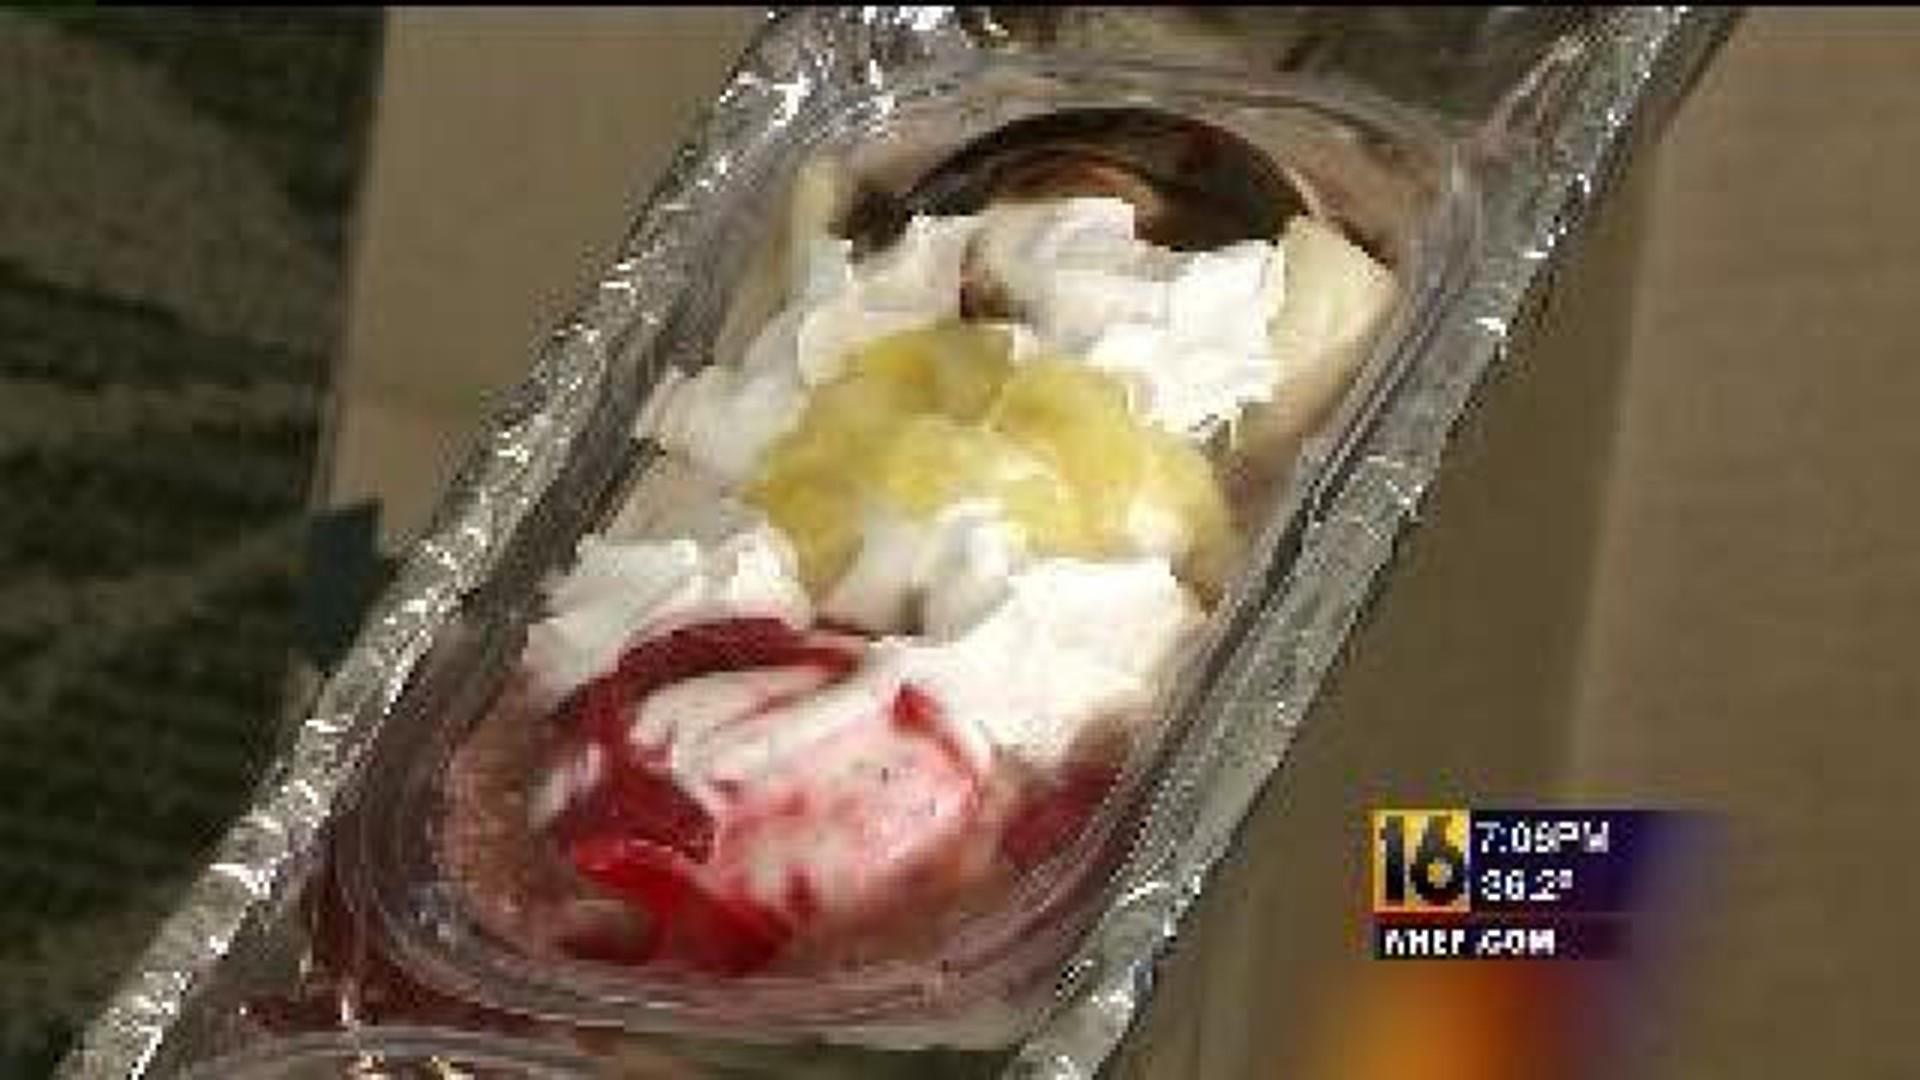 Banana Split Event in Selinsgrove Cancelled